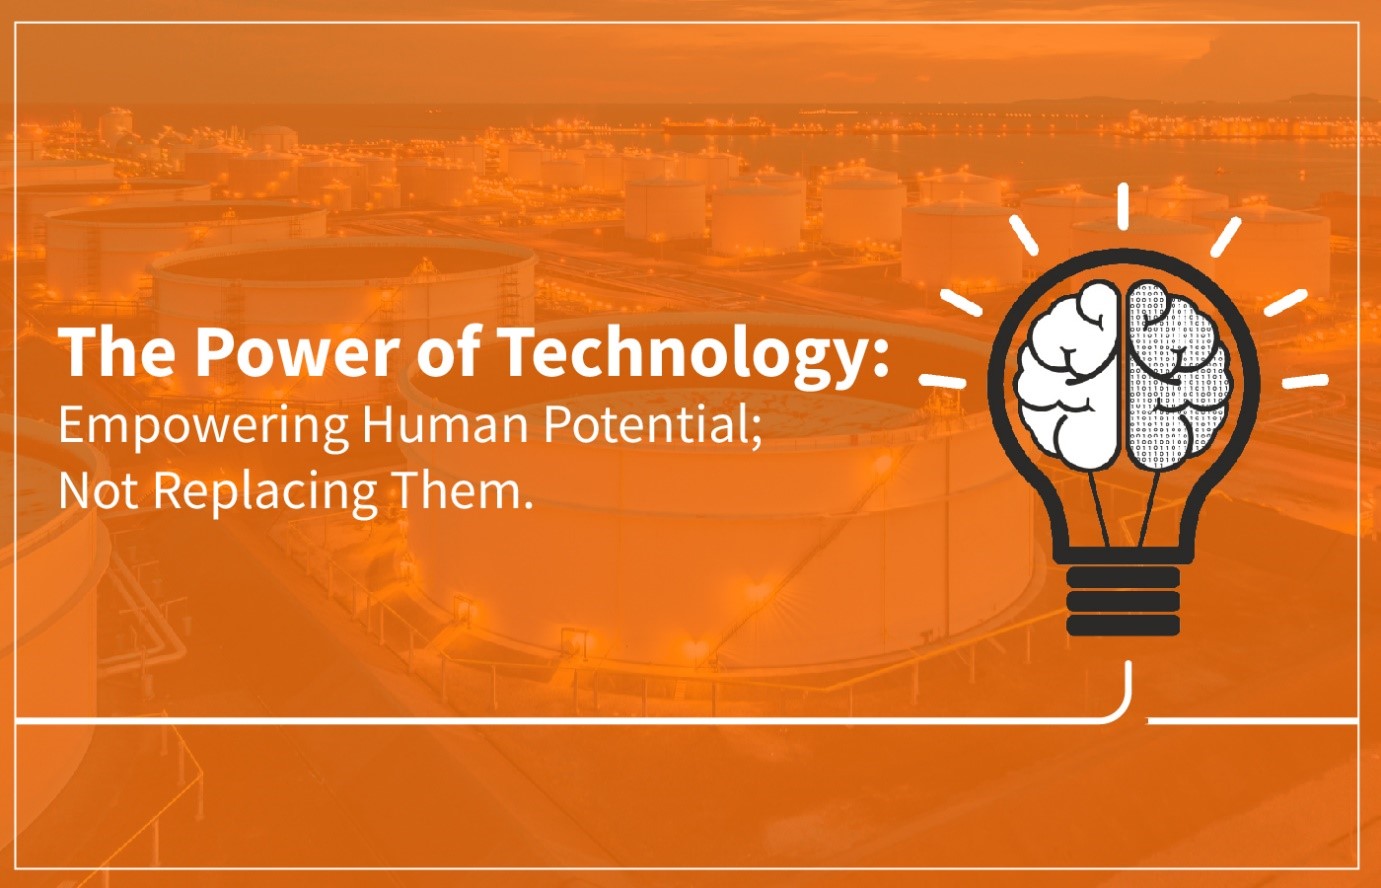 Technology Power Empowering Human Potential.